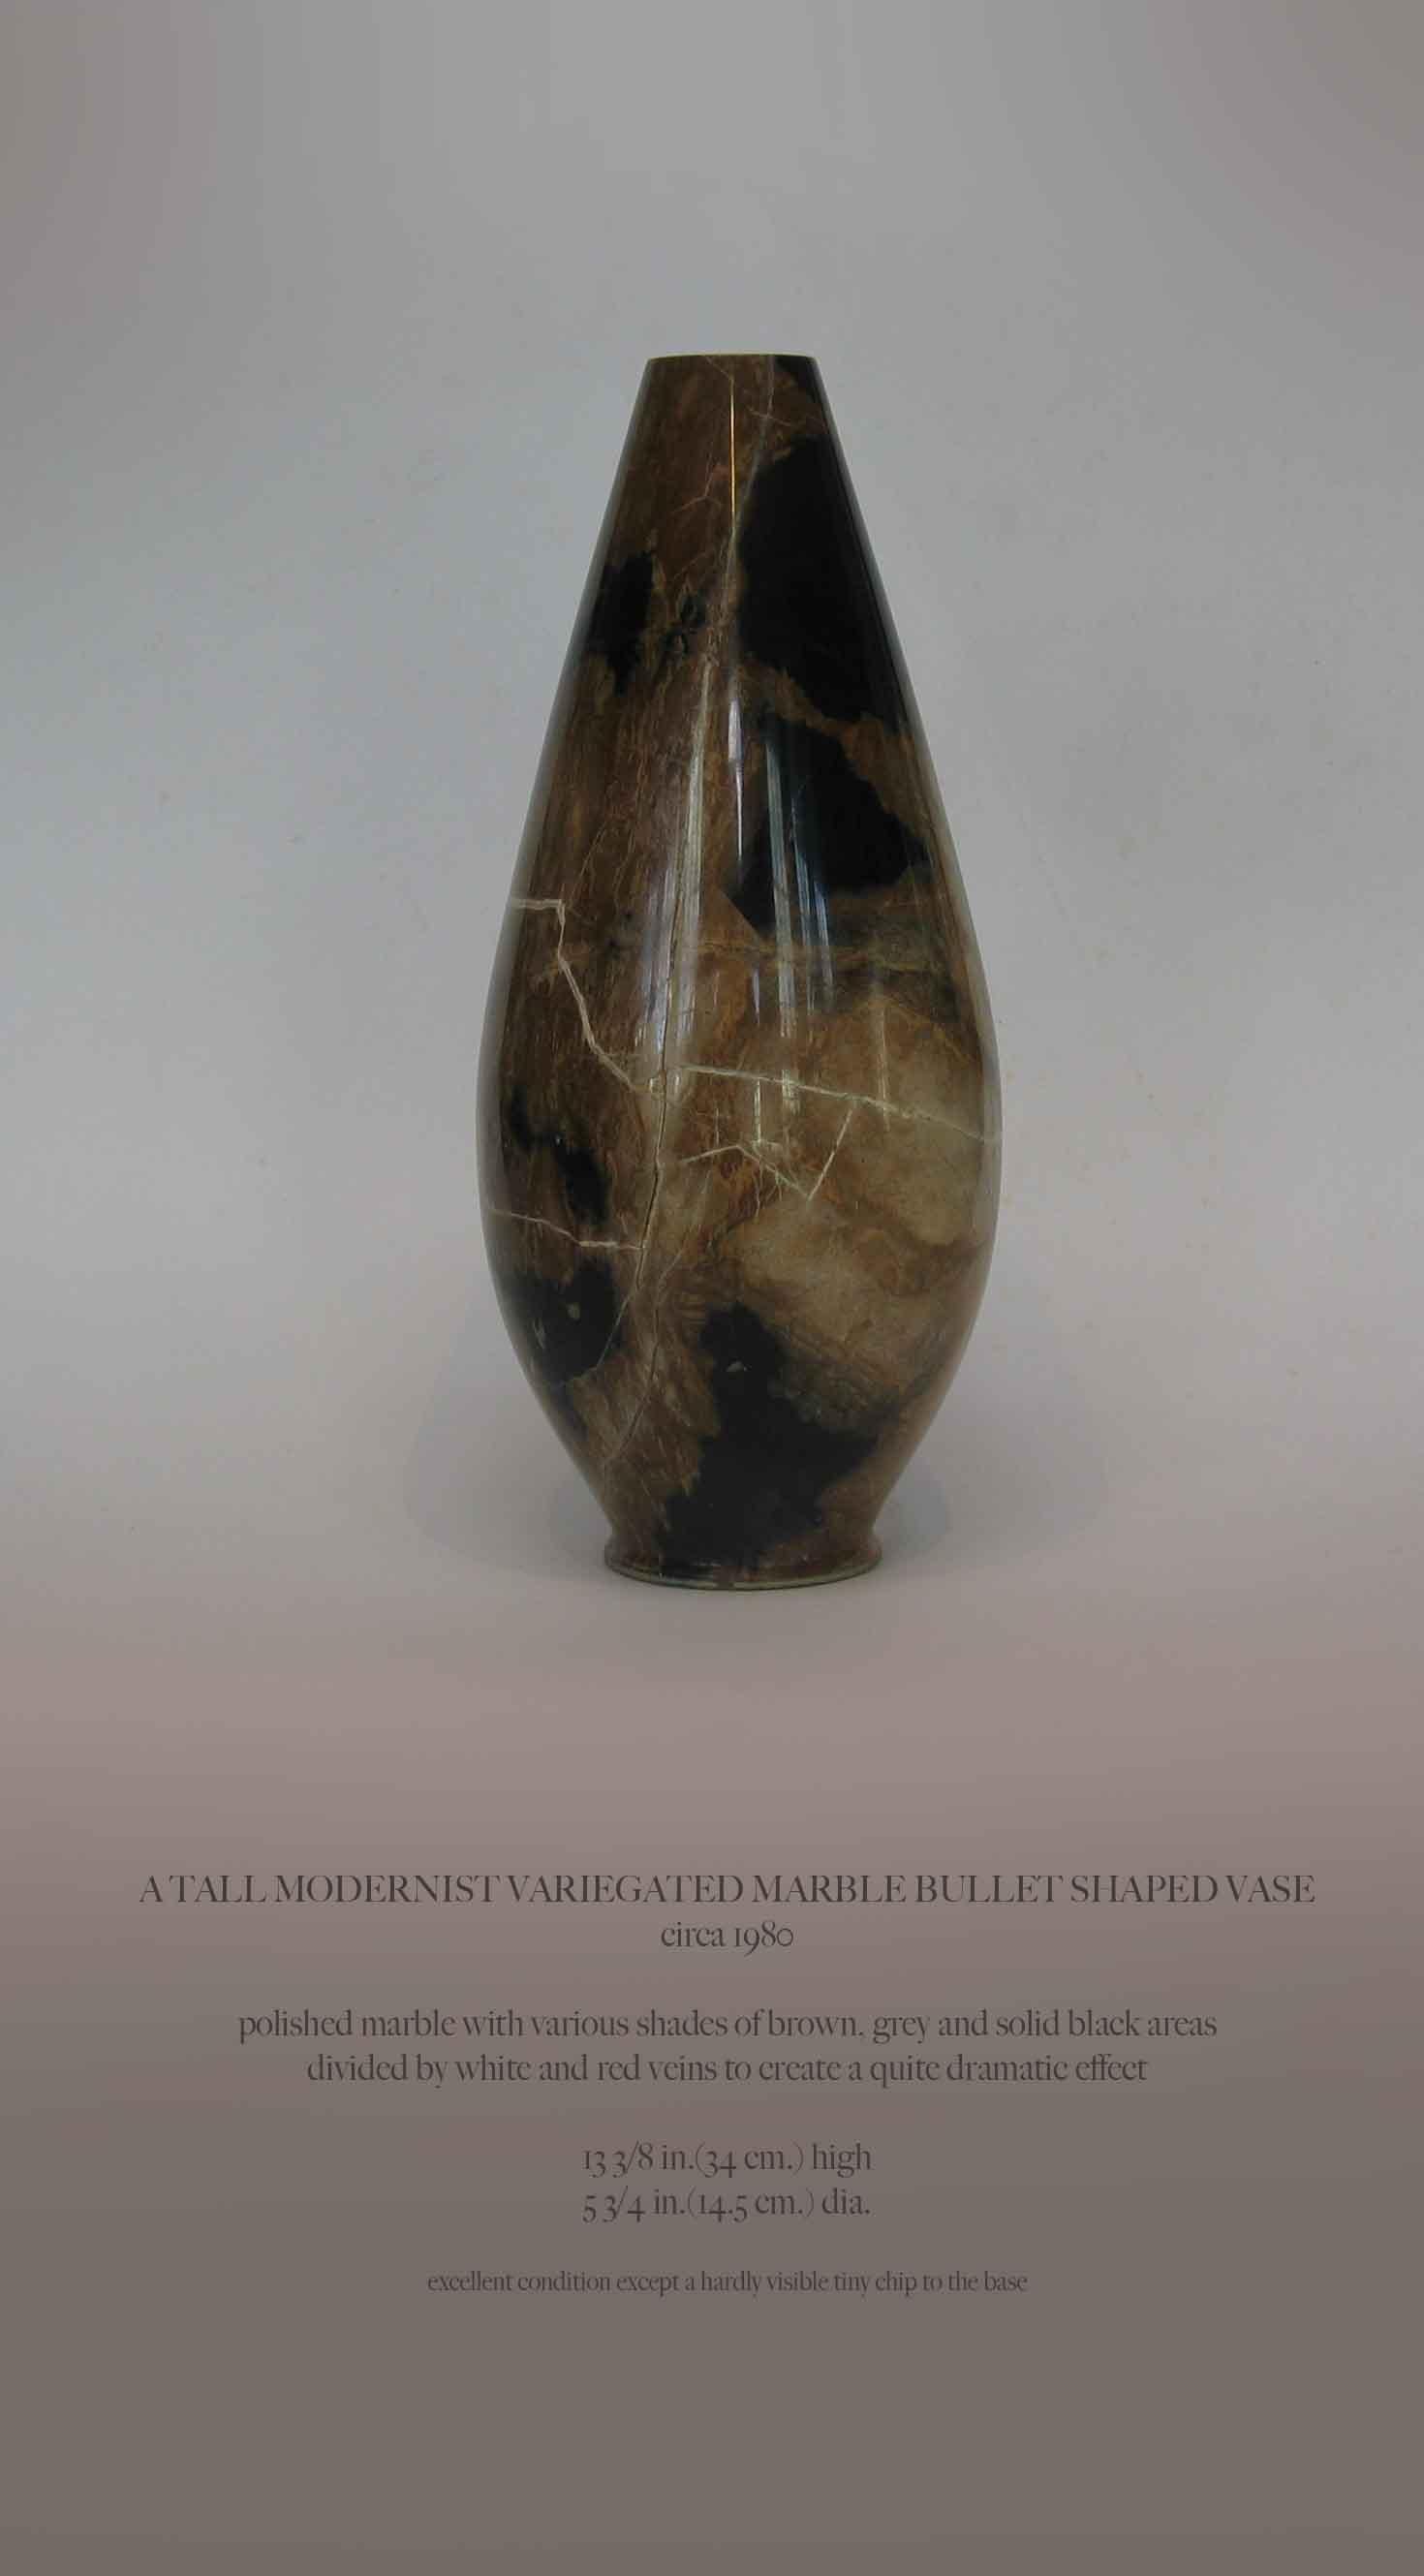 A TALL MODERNIST VARIEGATED MARBLE BULLET SHAPED VASE
circa 1980

Polished marble with various shades of brown, grey and solid black areas
divided by white and red veins to create a quite dramatic effect.

13 3/8